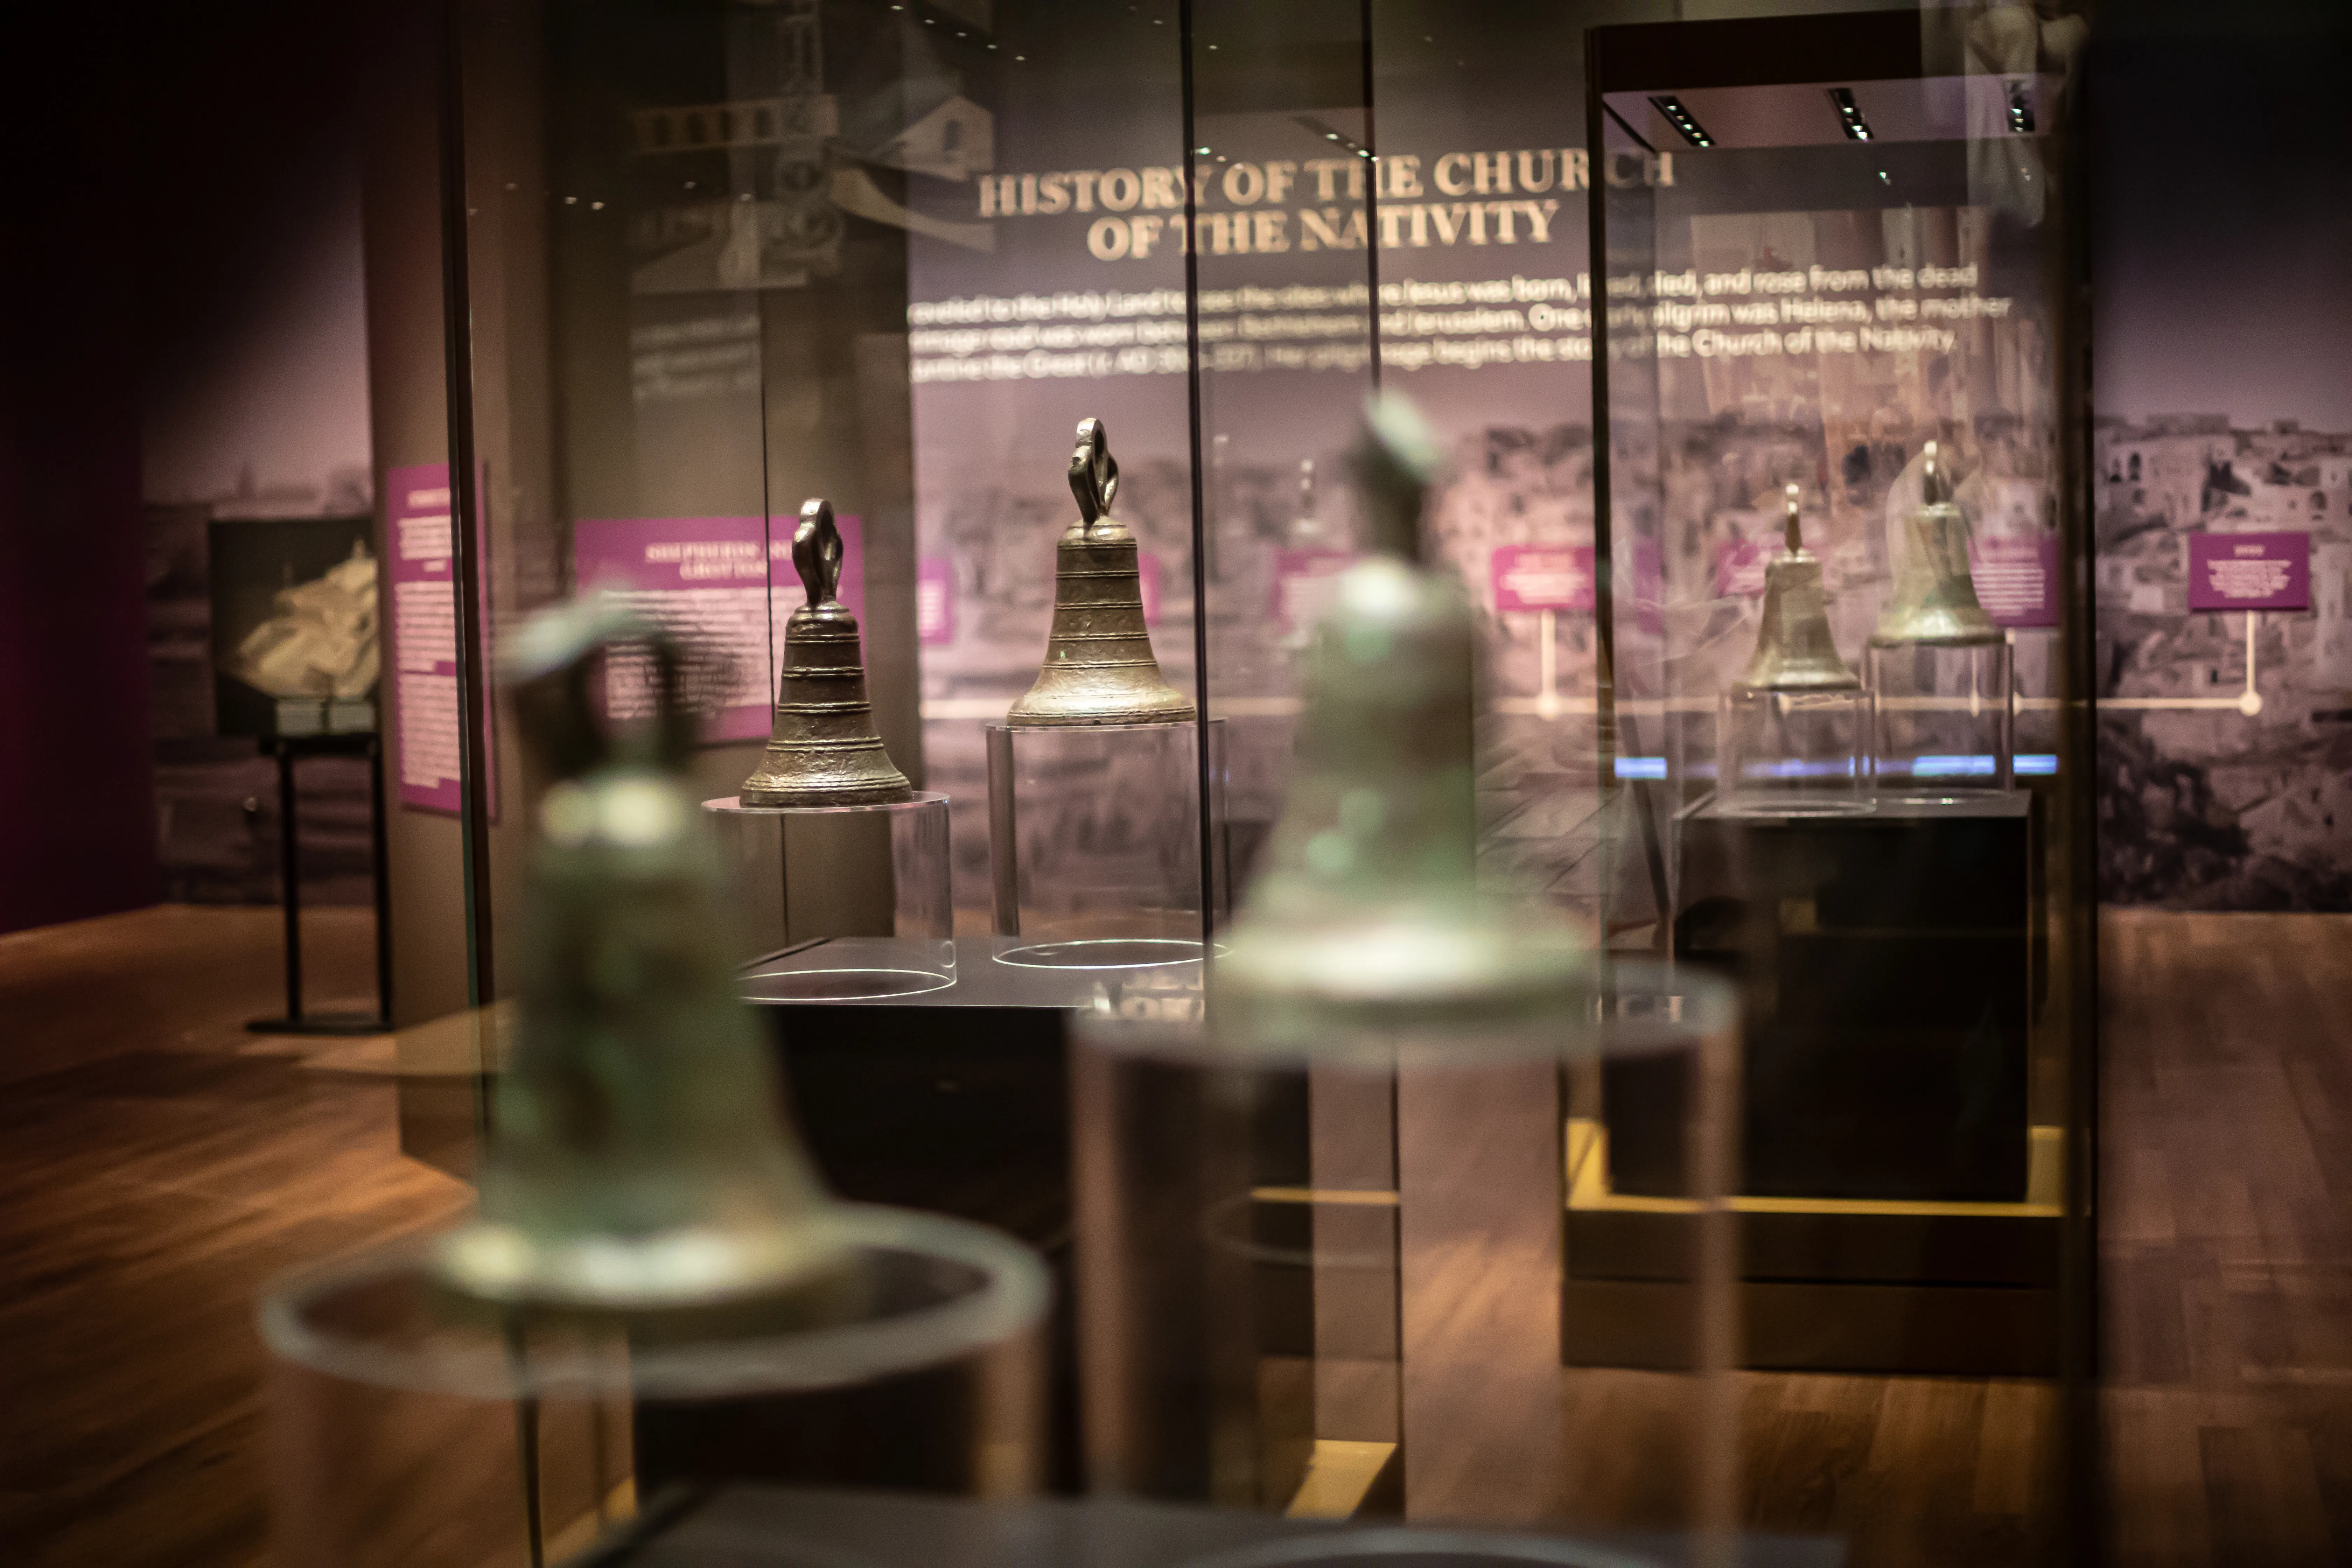 The bells that once graced the spires of the ancient Church of the Nativity in Bethlehem have traveled from the Holy Land to the Museum of the Bible in Washington, D.C.?w=200&h=150